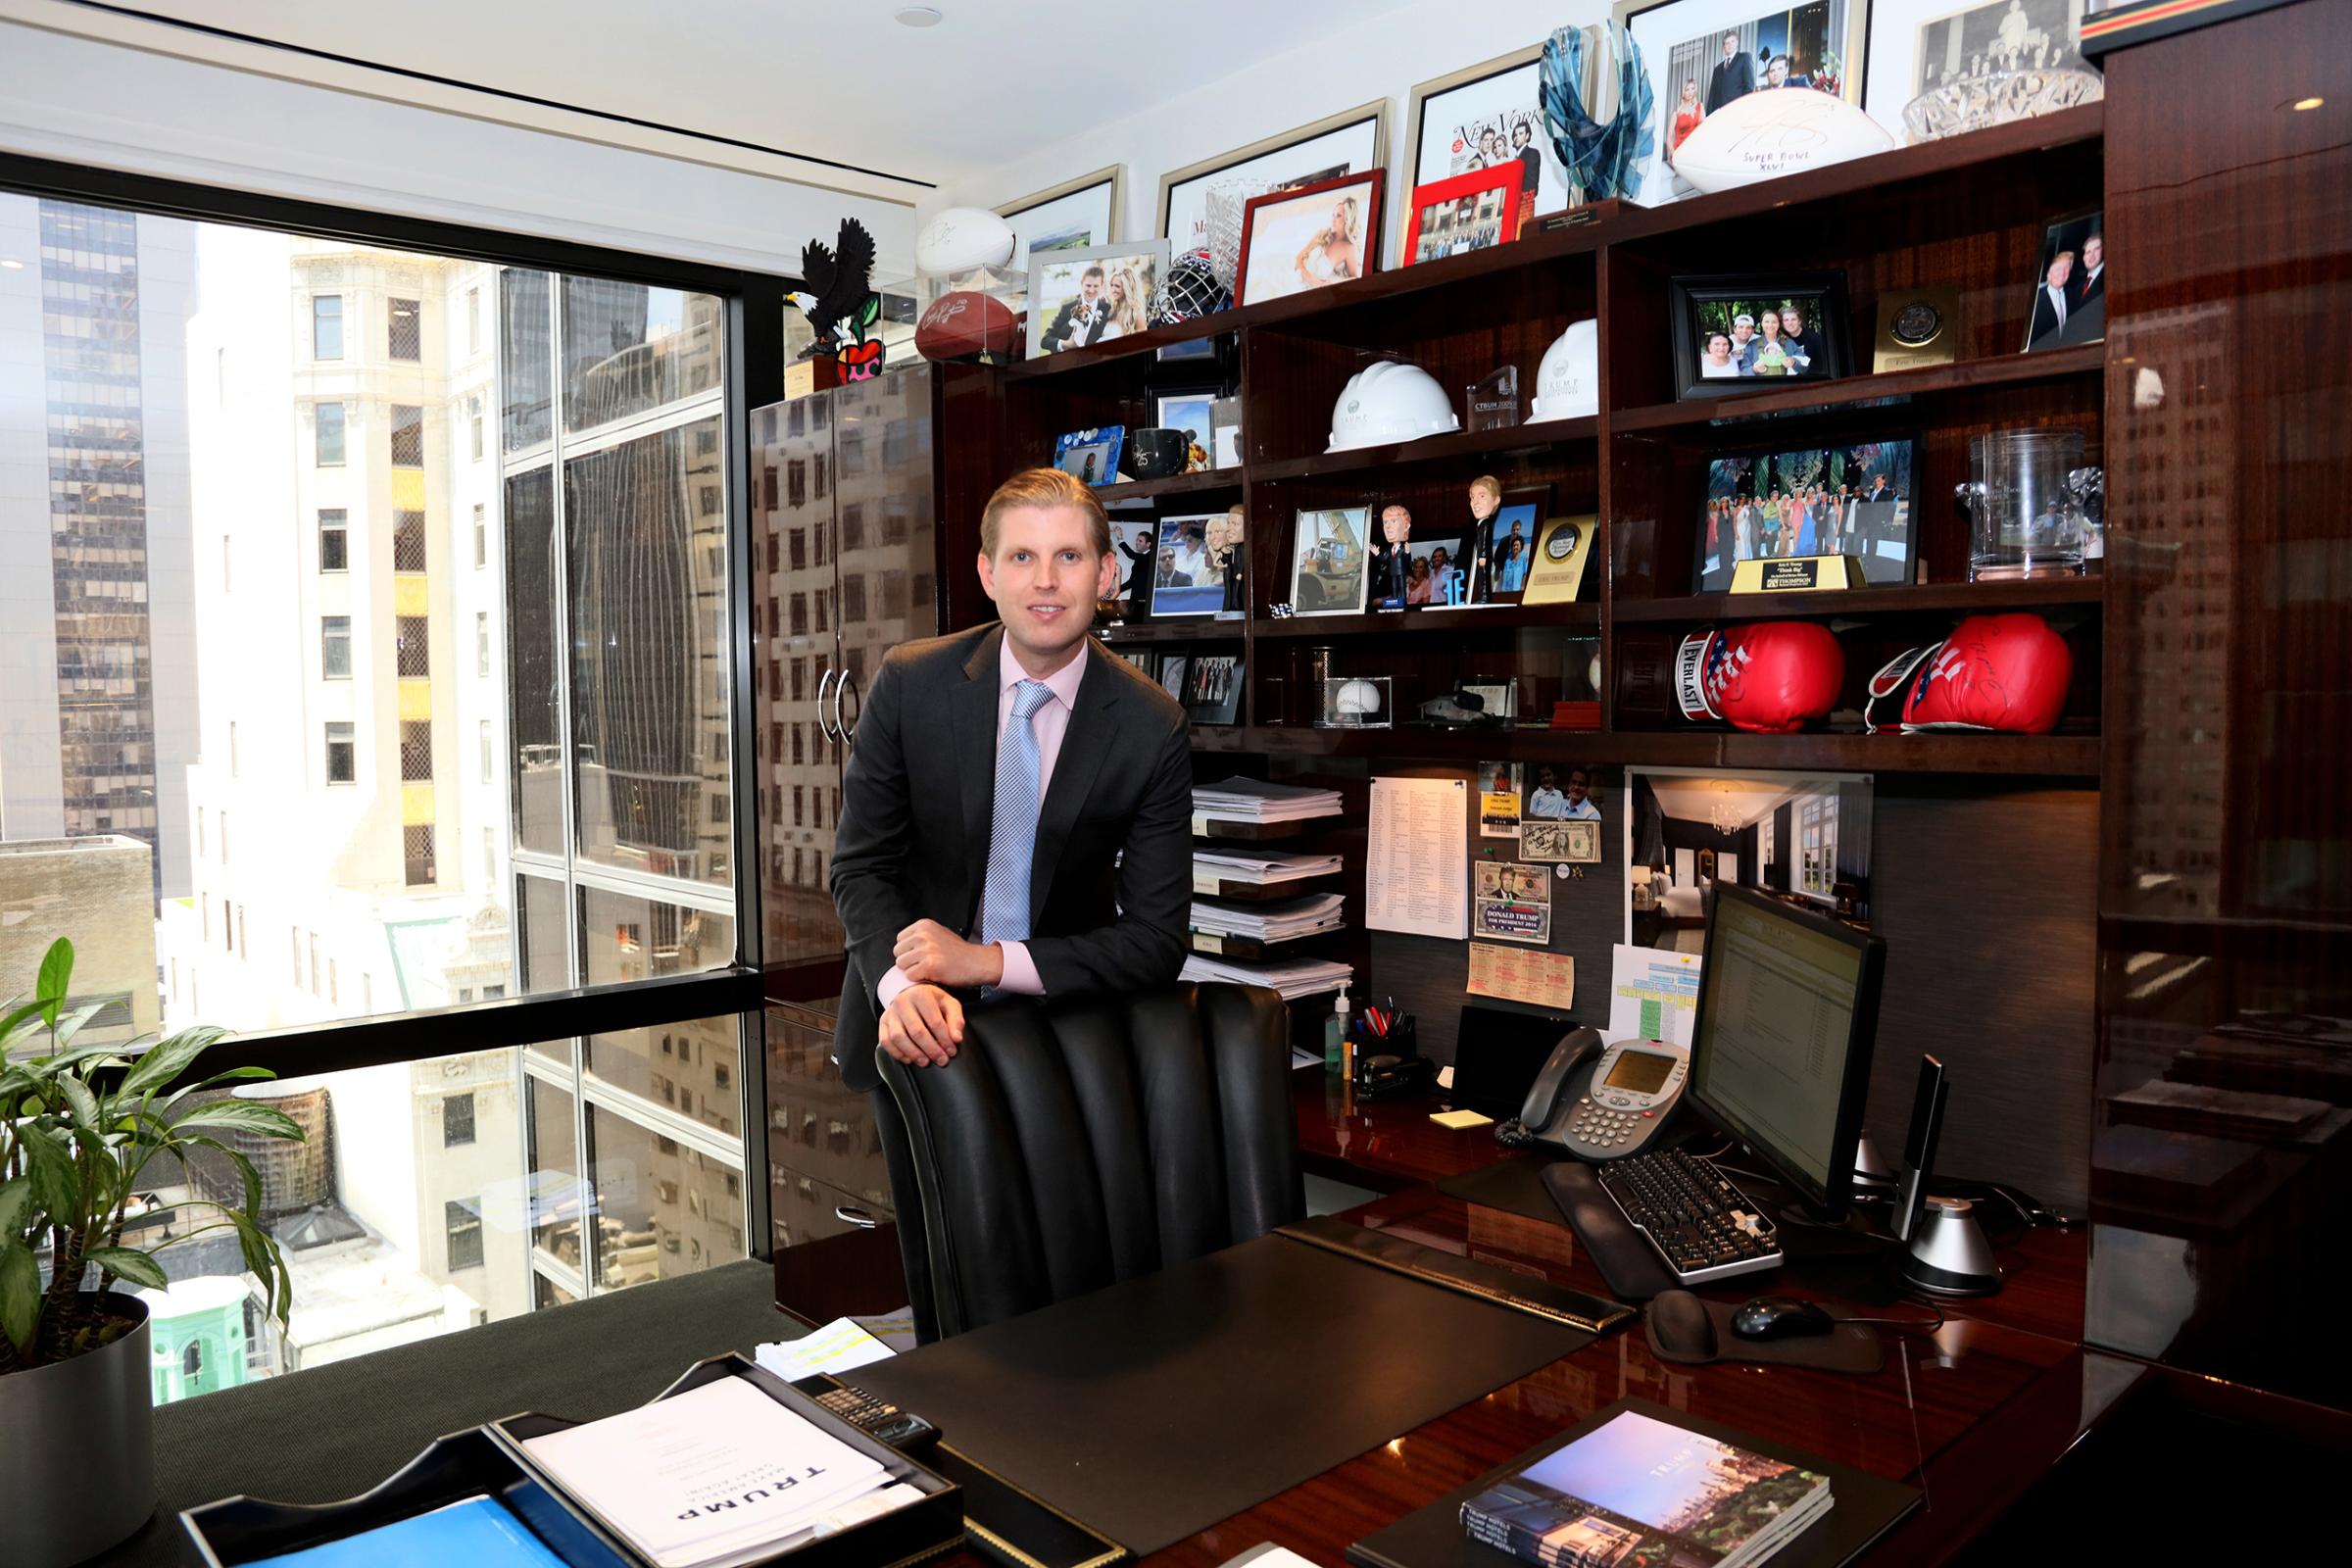 Eric Trump in his office at Trump Tower in New York City on July 6, 2016.